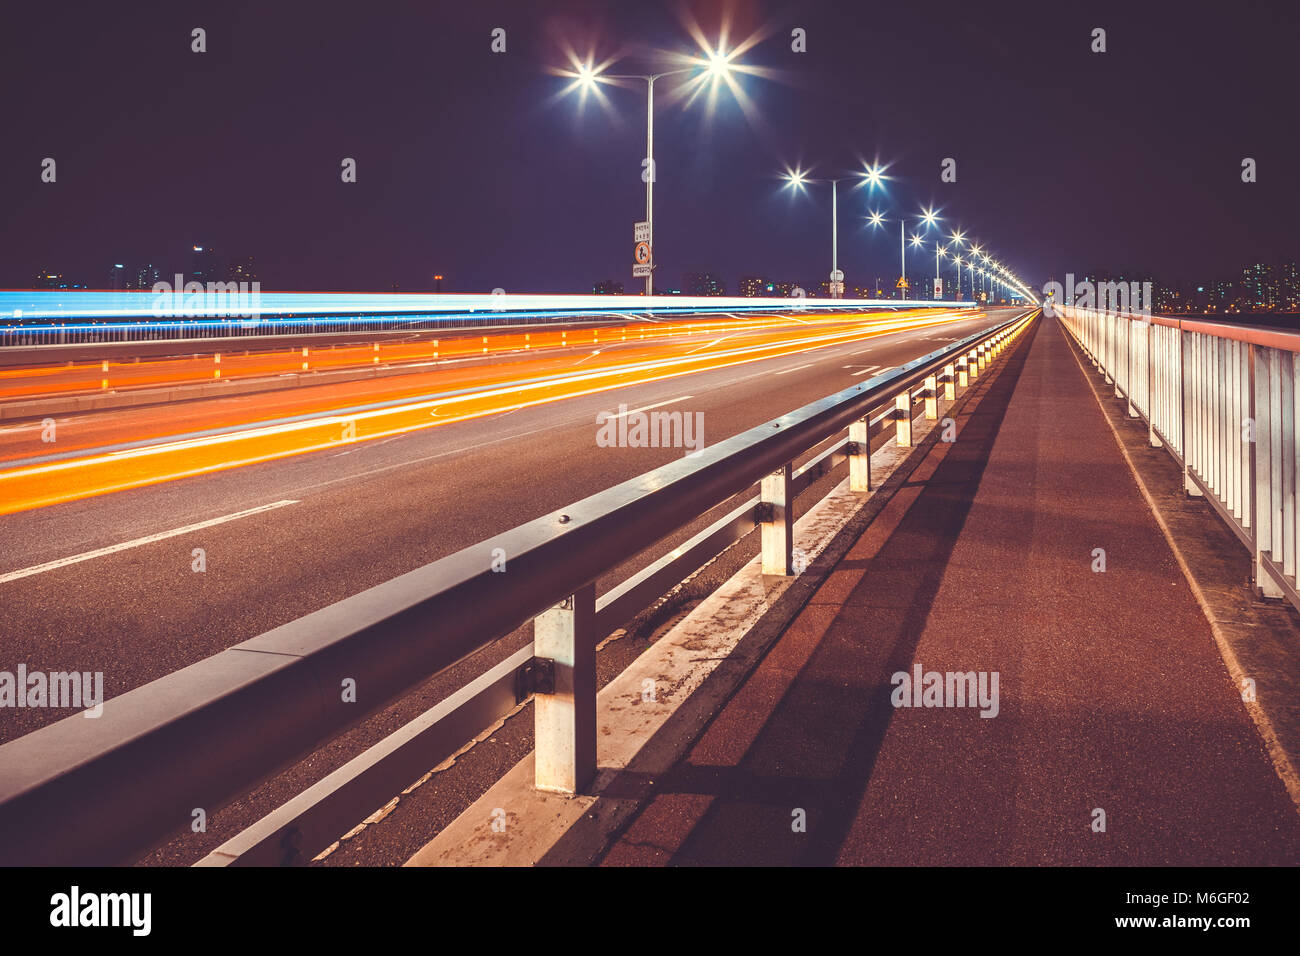 Several cars passing bridge through Han river and leaving lights traces behind them - Seoul, South Korea Stock Photo